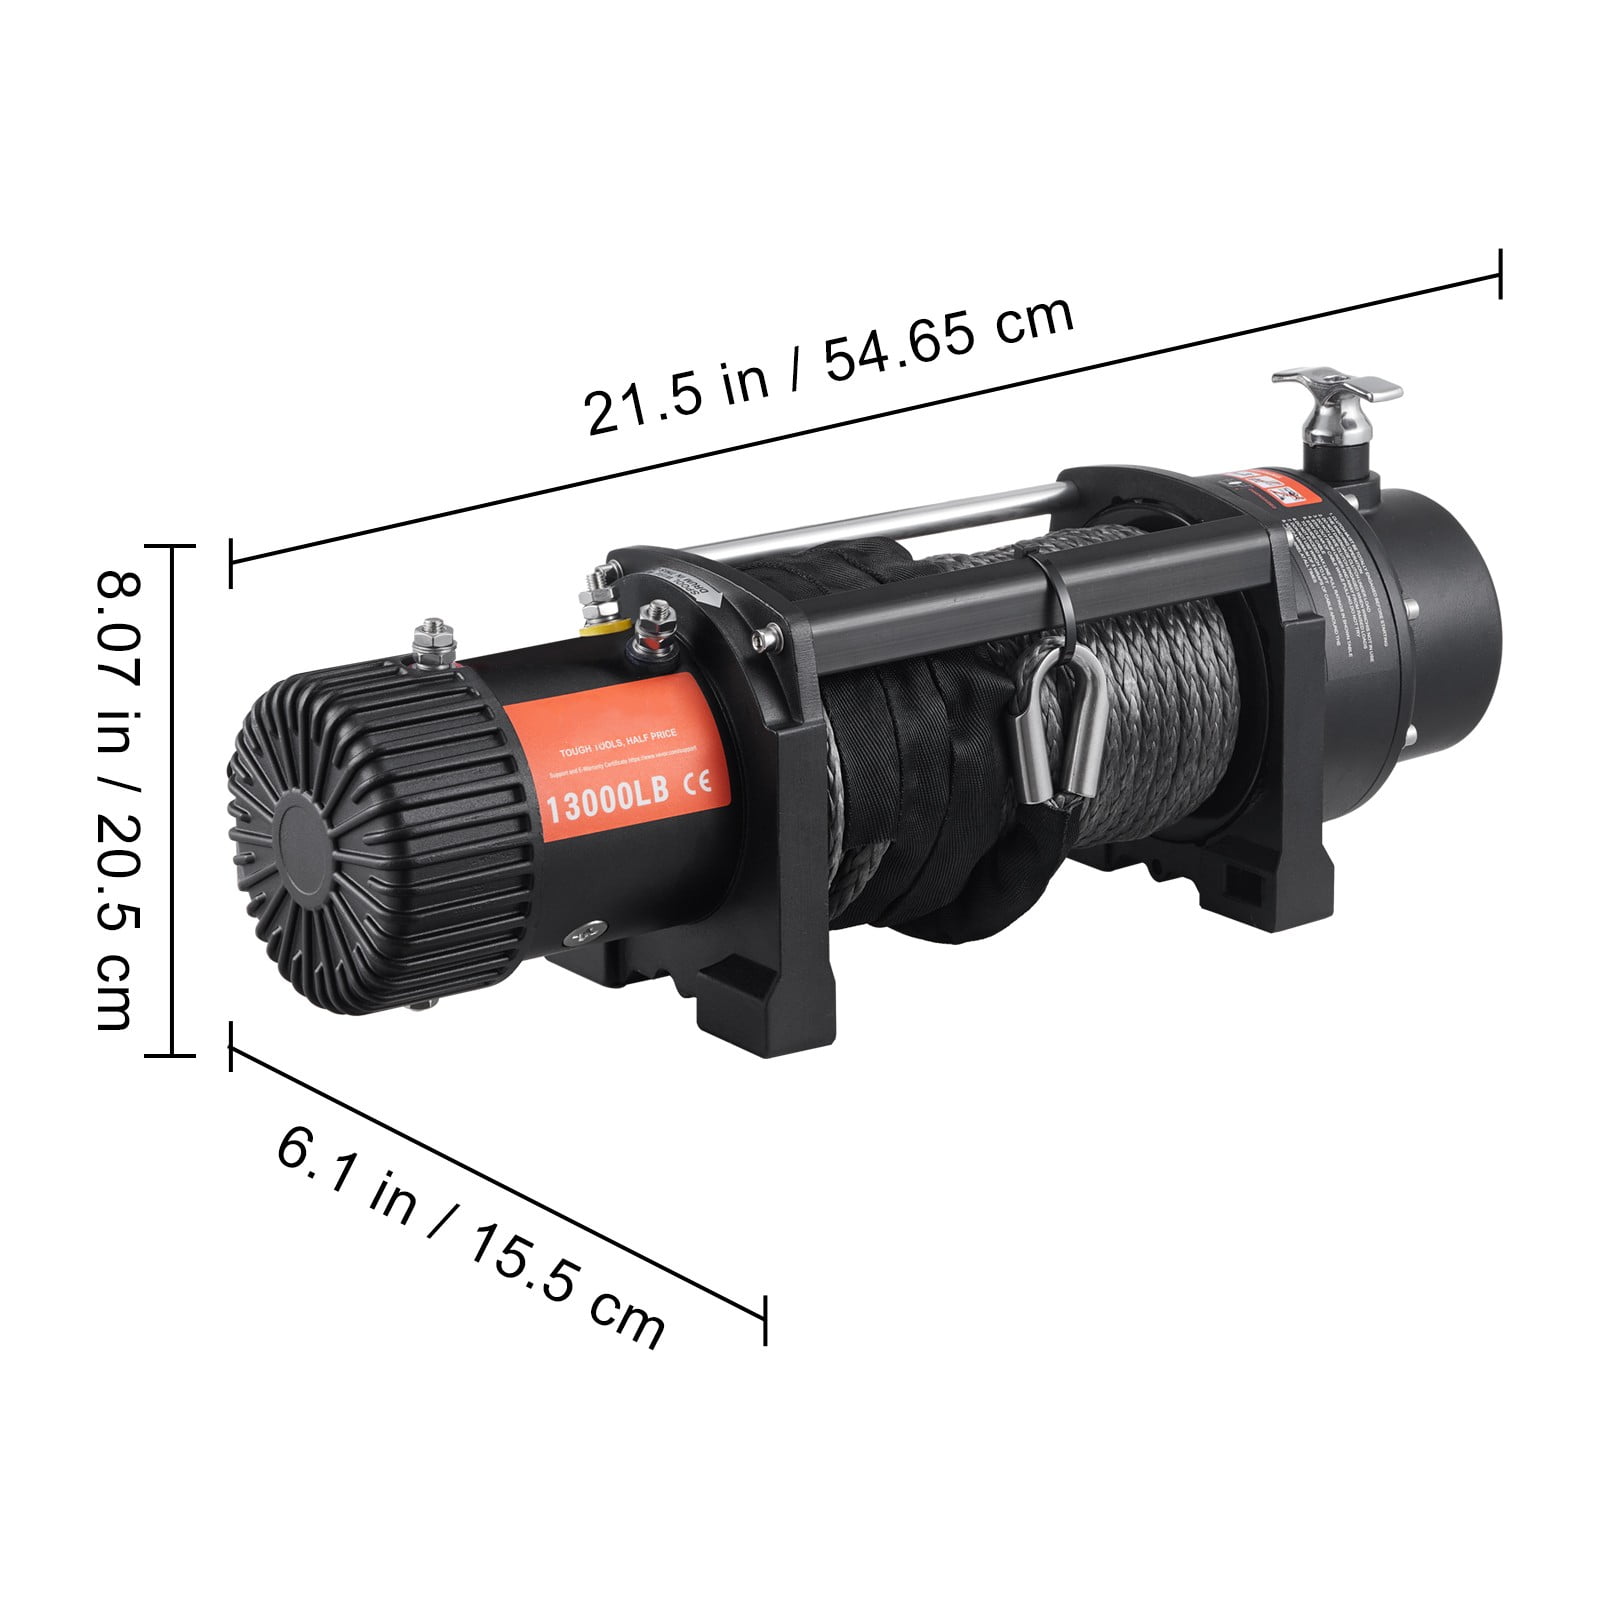 BENTISM Electric Winch, 12V 18,000 lb Load Capacity Steel Rope Winch, IP67  85ft ATV Winch with Wireless Handheld Remote